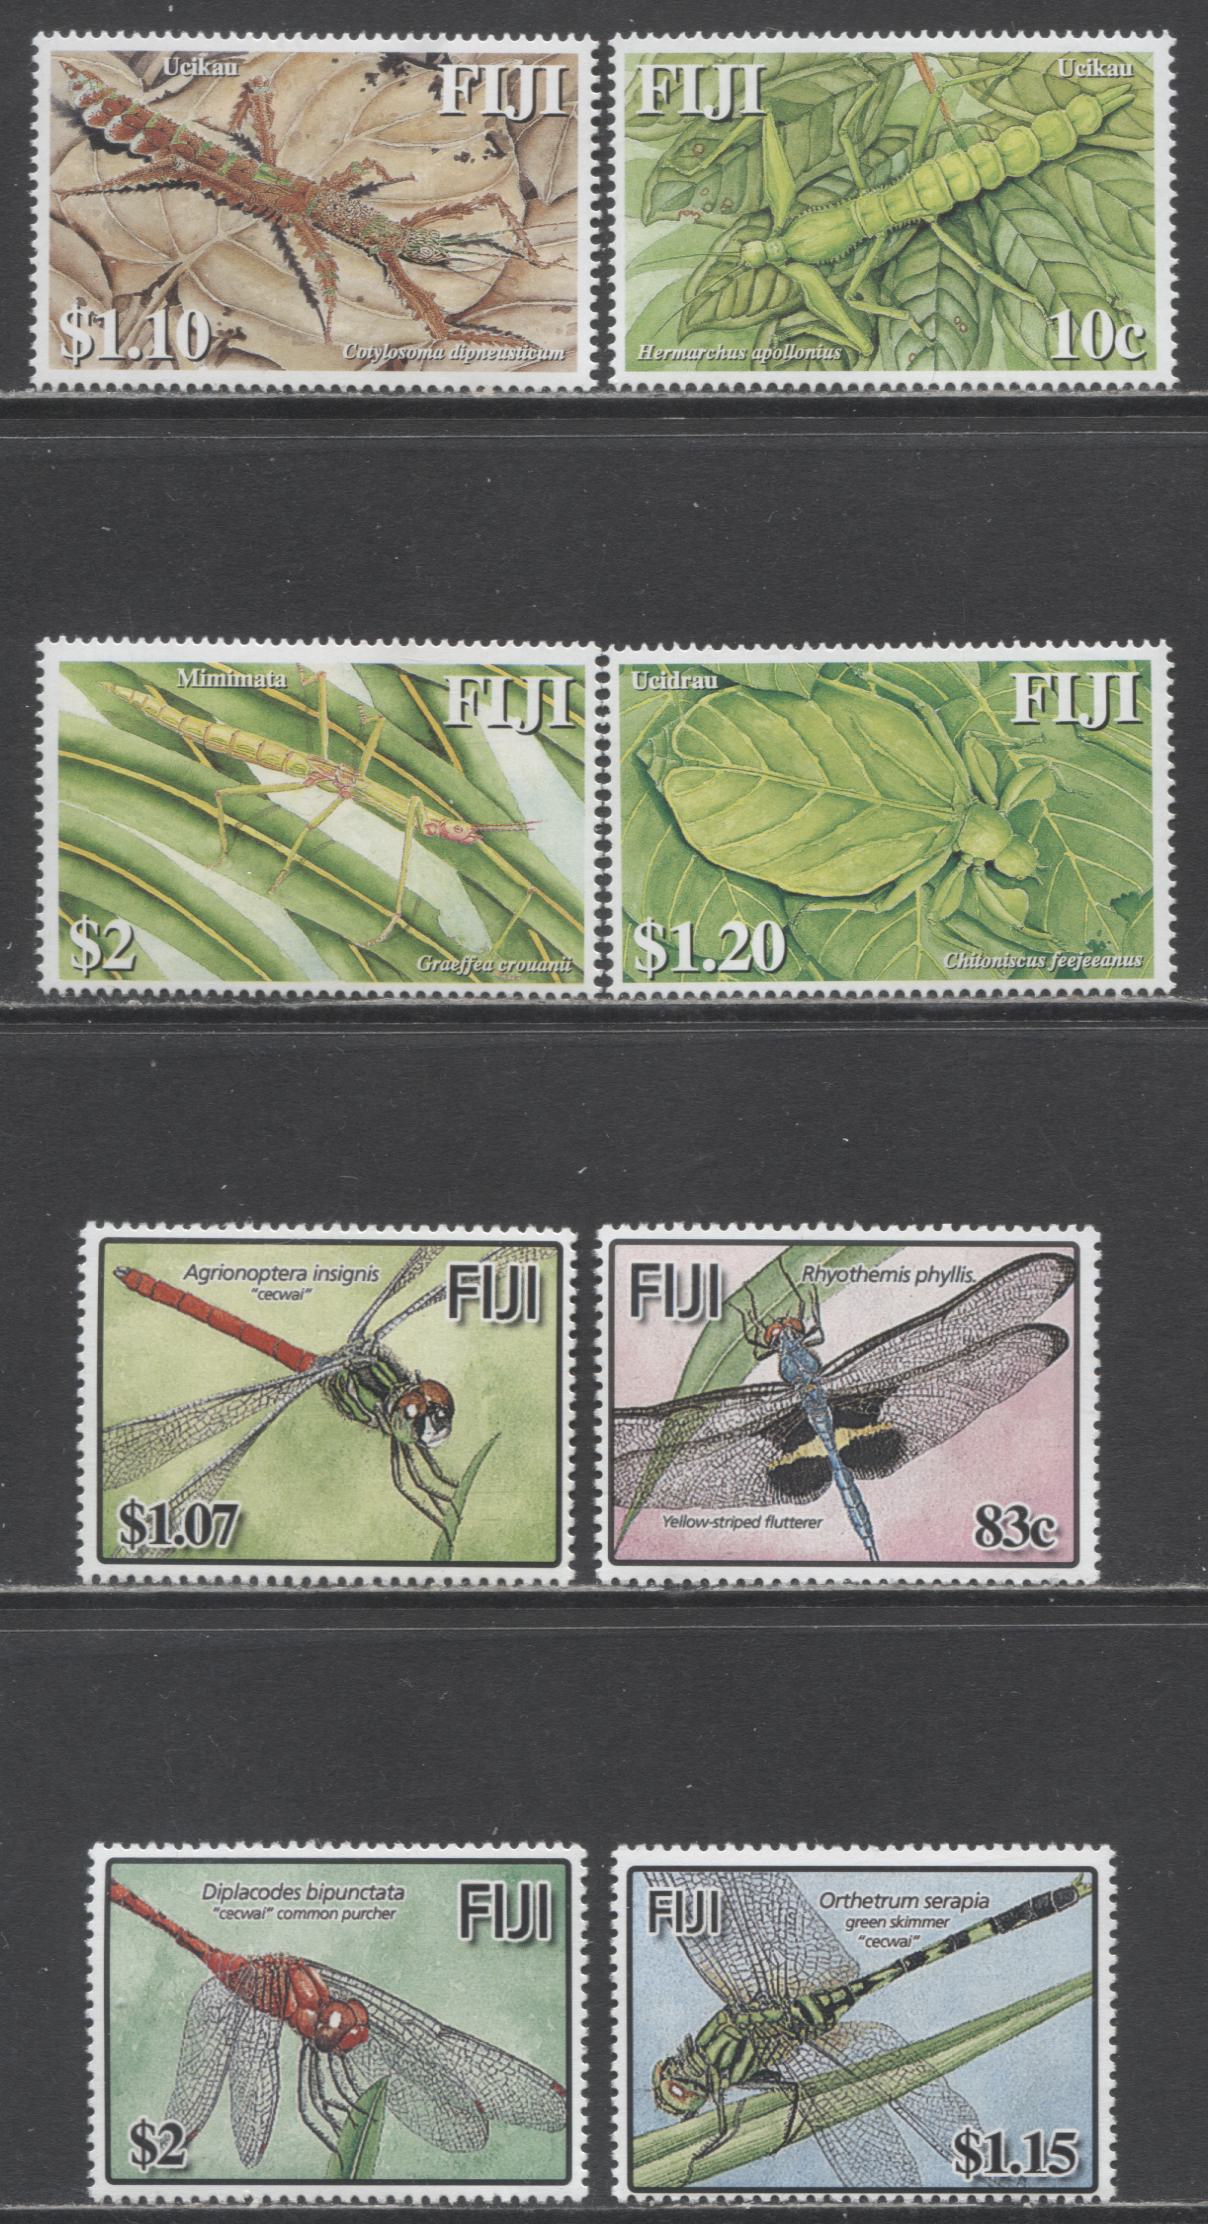 Lot 183 Fiji SC#1060/1110 2005-2006 Dragonflies & Phasmid Issues, 8 VFNH Singles, Click on Listing to See ALL Pictures, 2017 Scott Cat. $15